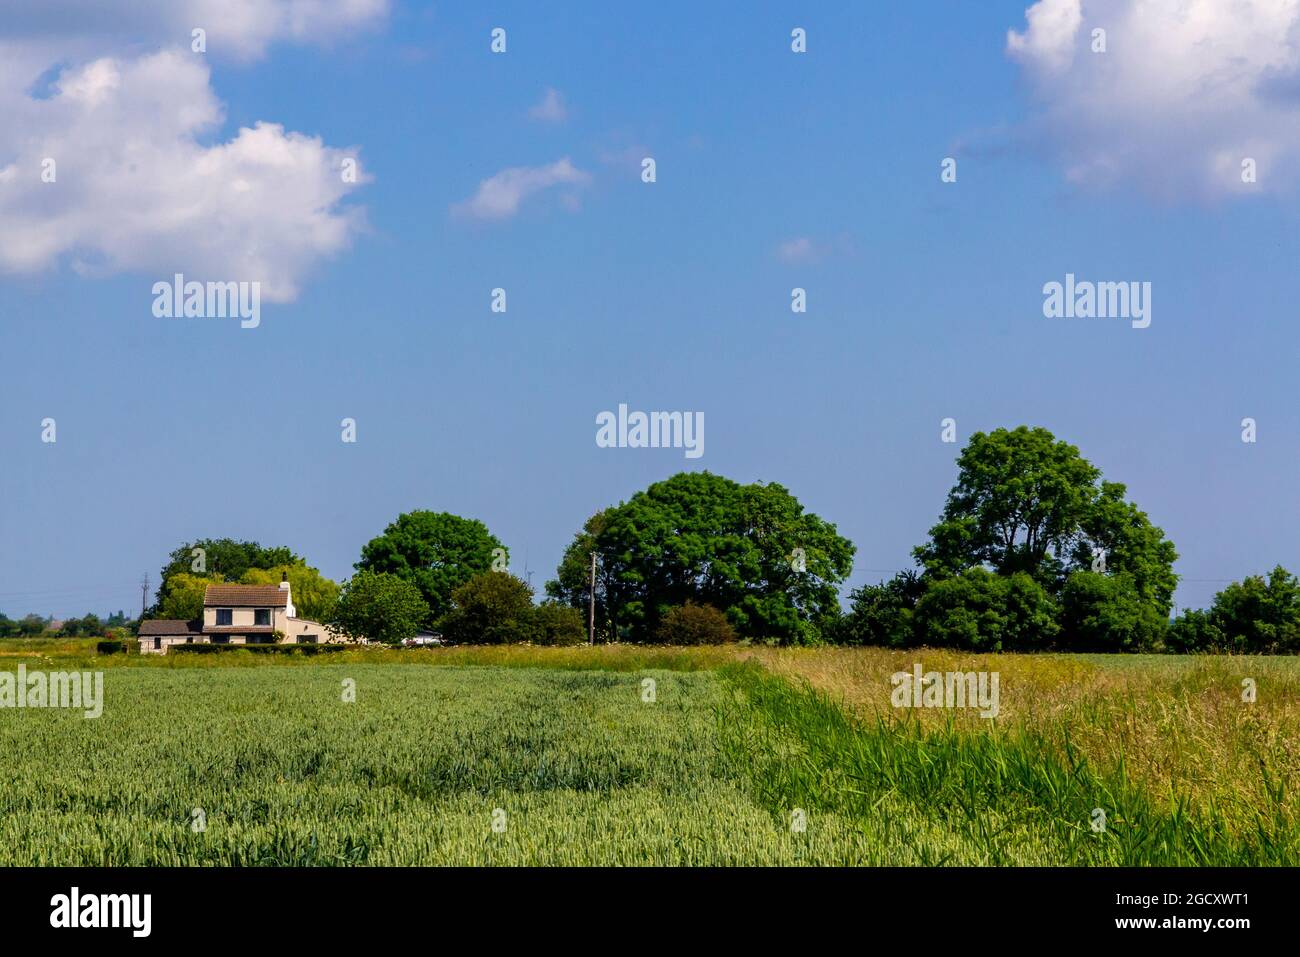 Arable farmland in June near Wainfleet in Lincolnshire East Midlands England UK Stock Photo